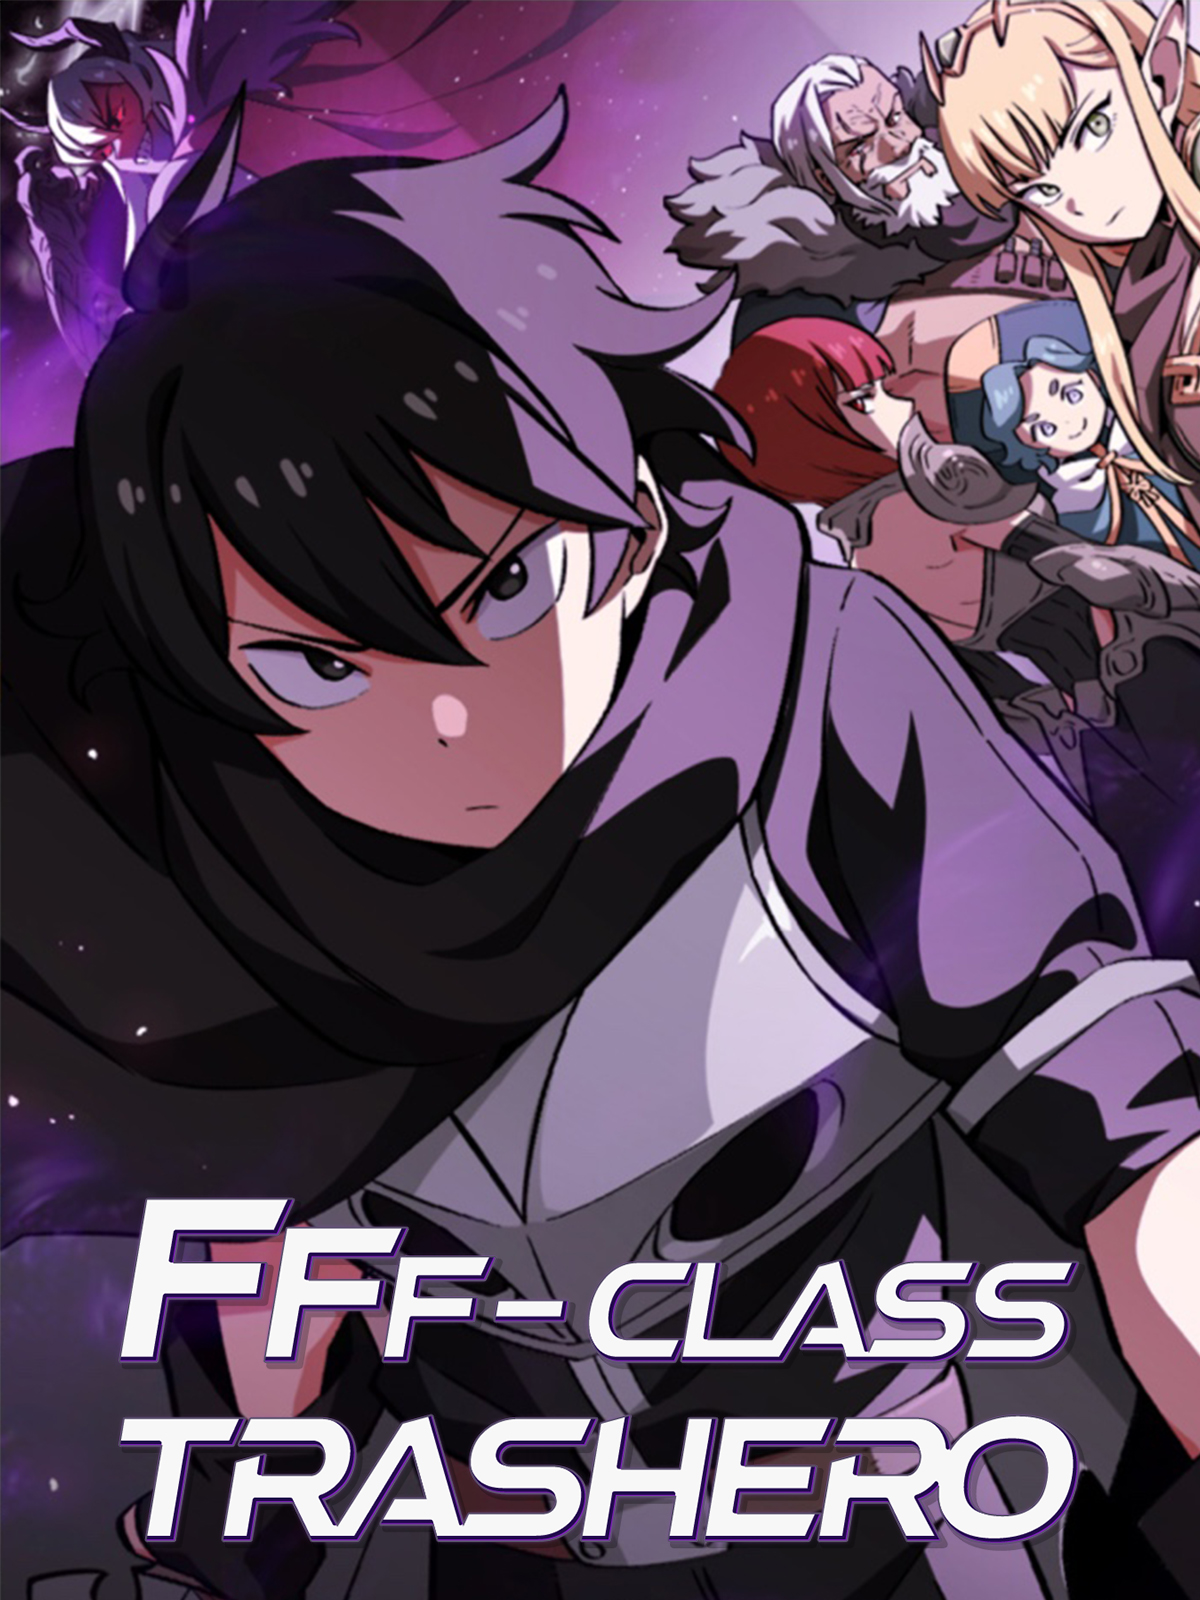 FFF-Class Trashhero Chapter 98 - Chapter 97: Life is One Blow!